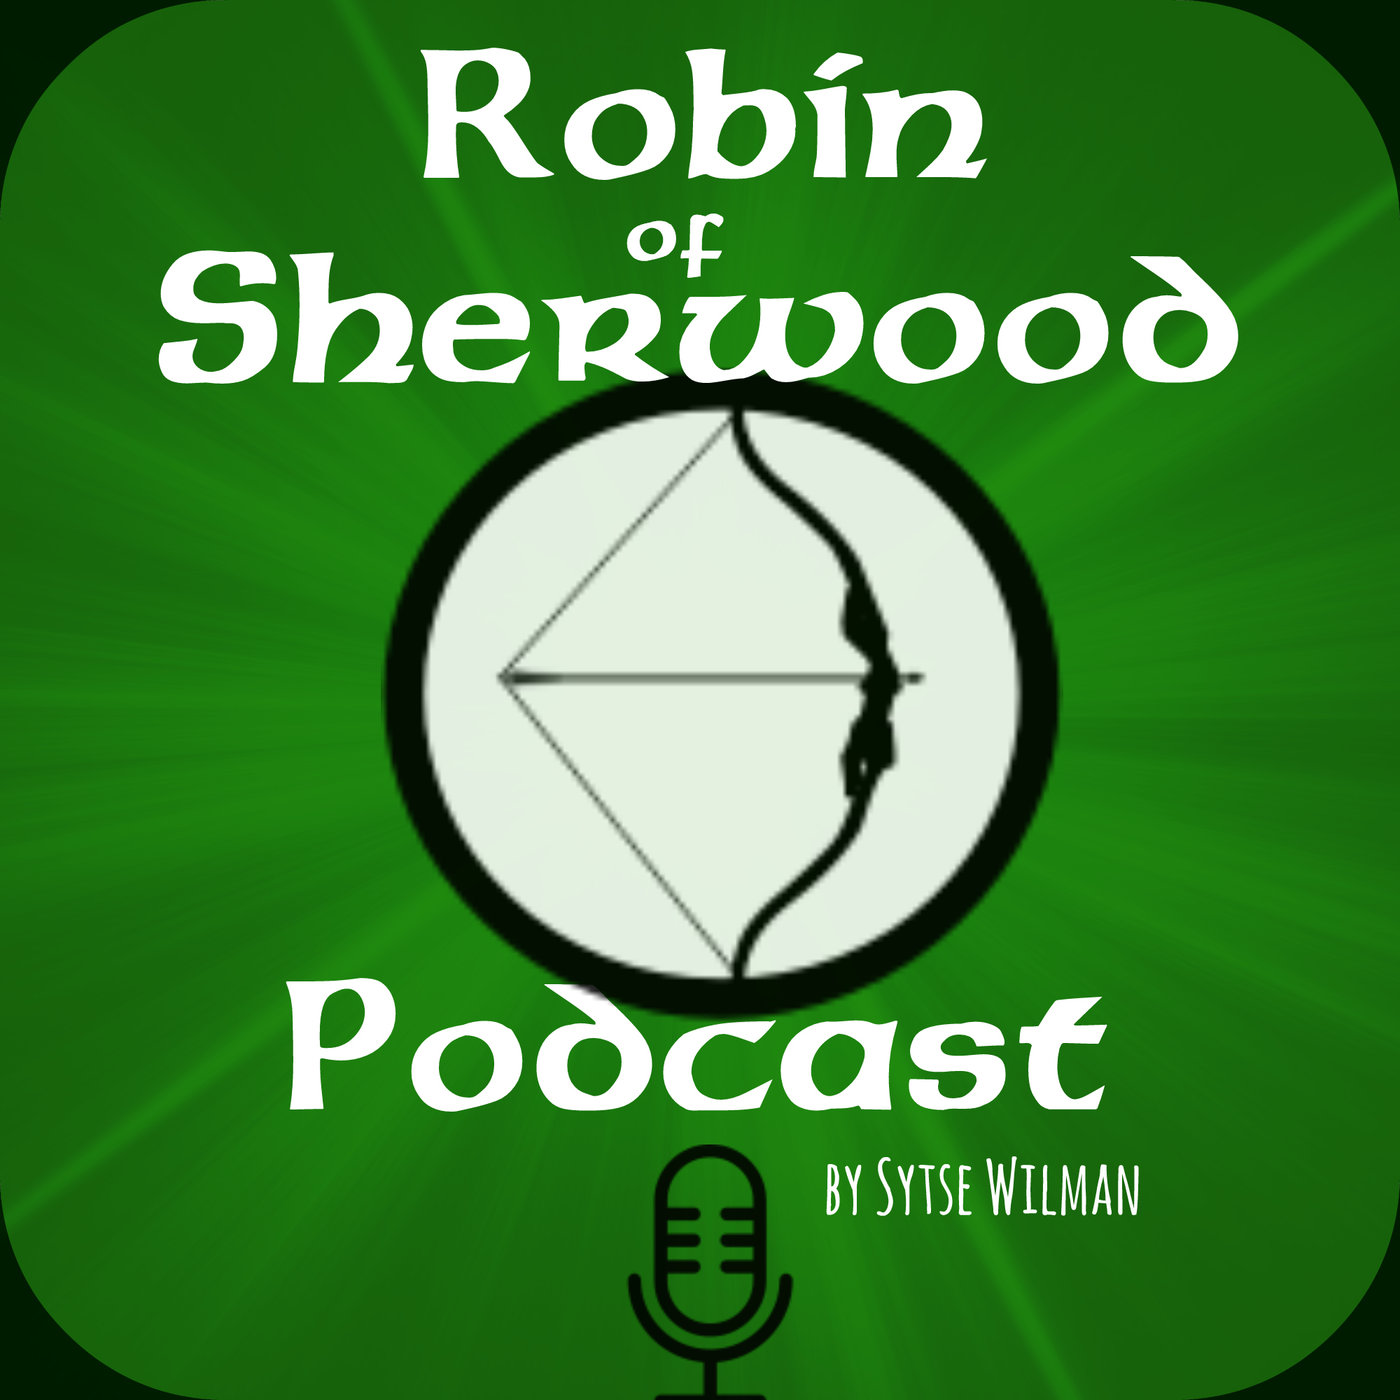 Robin of Sherwood Podcast s03 e06 The Cross of st Ciricus